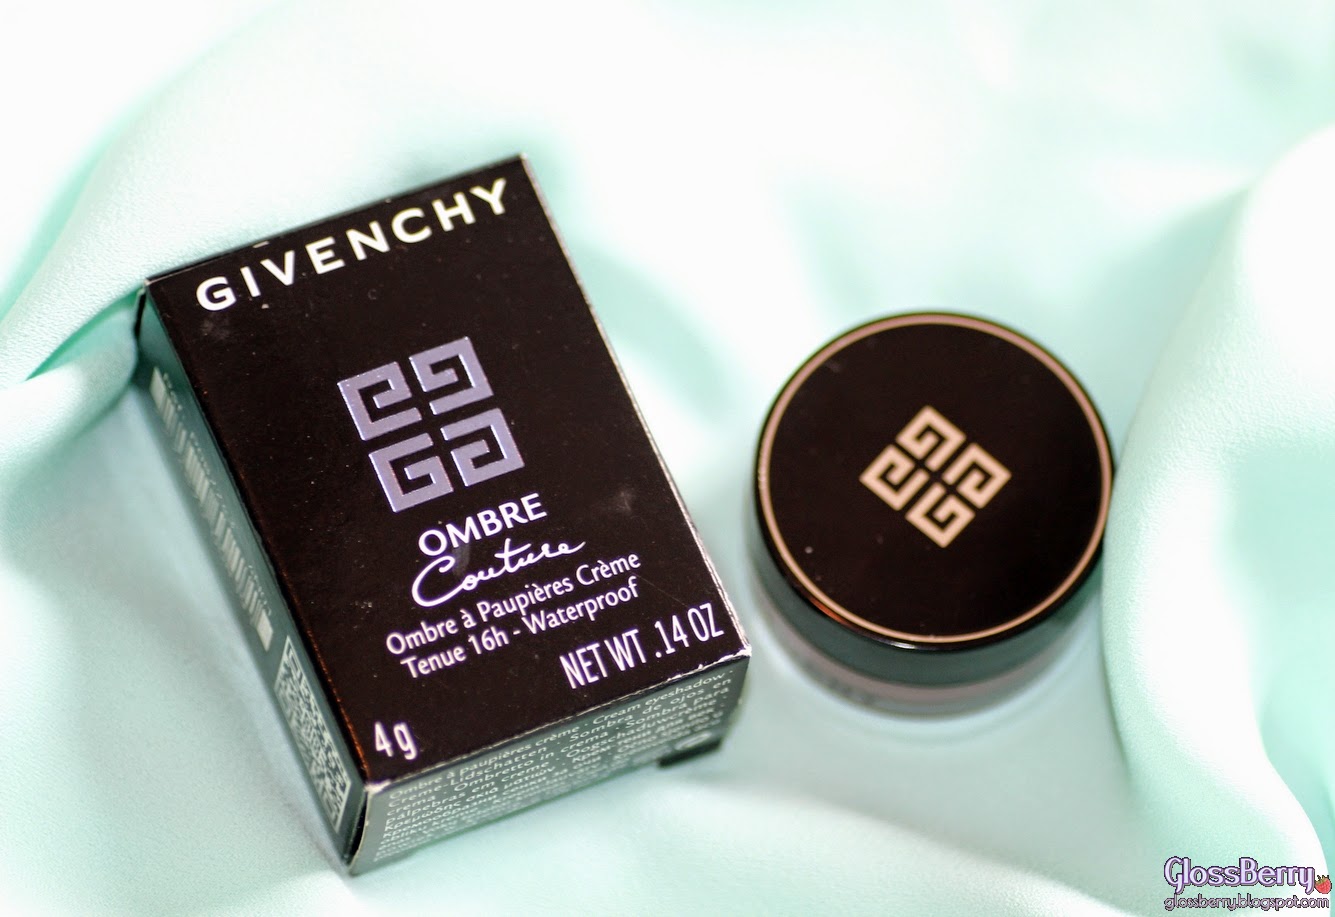  GIVENCHY Ombre Couture - 3 - Rose Dentelle review swatches glossberry צללית קרם ג'יבנשי גלוסברי בלוג איפור וטיפוח